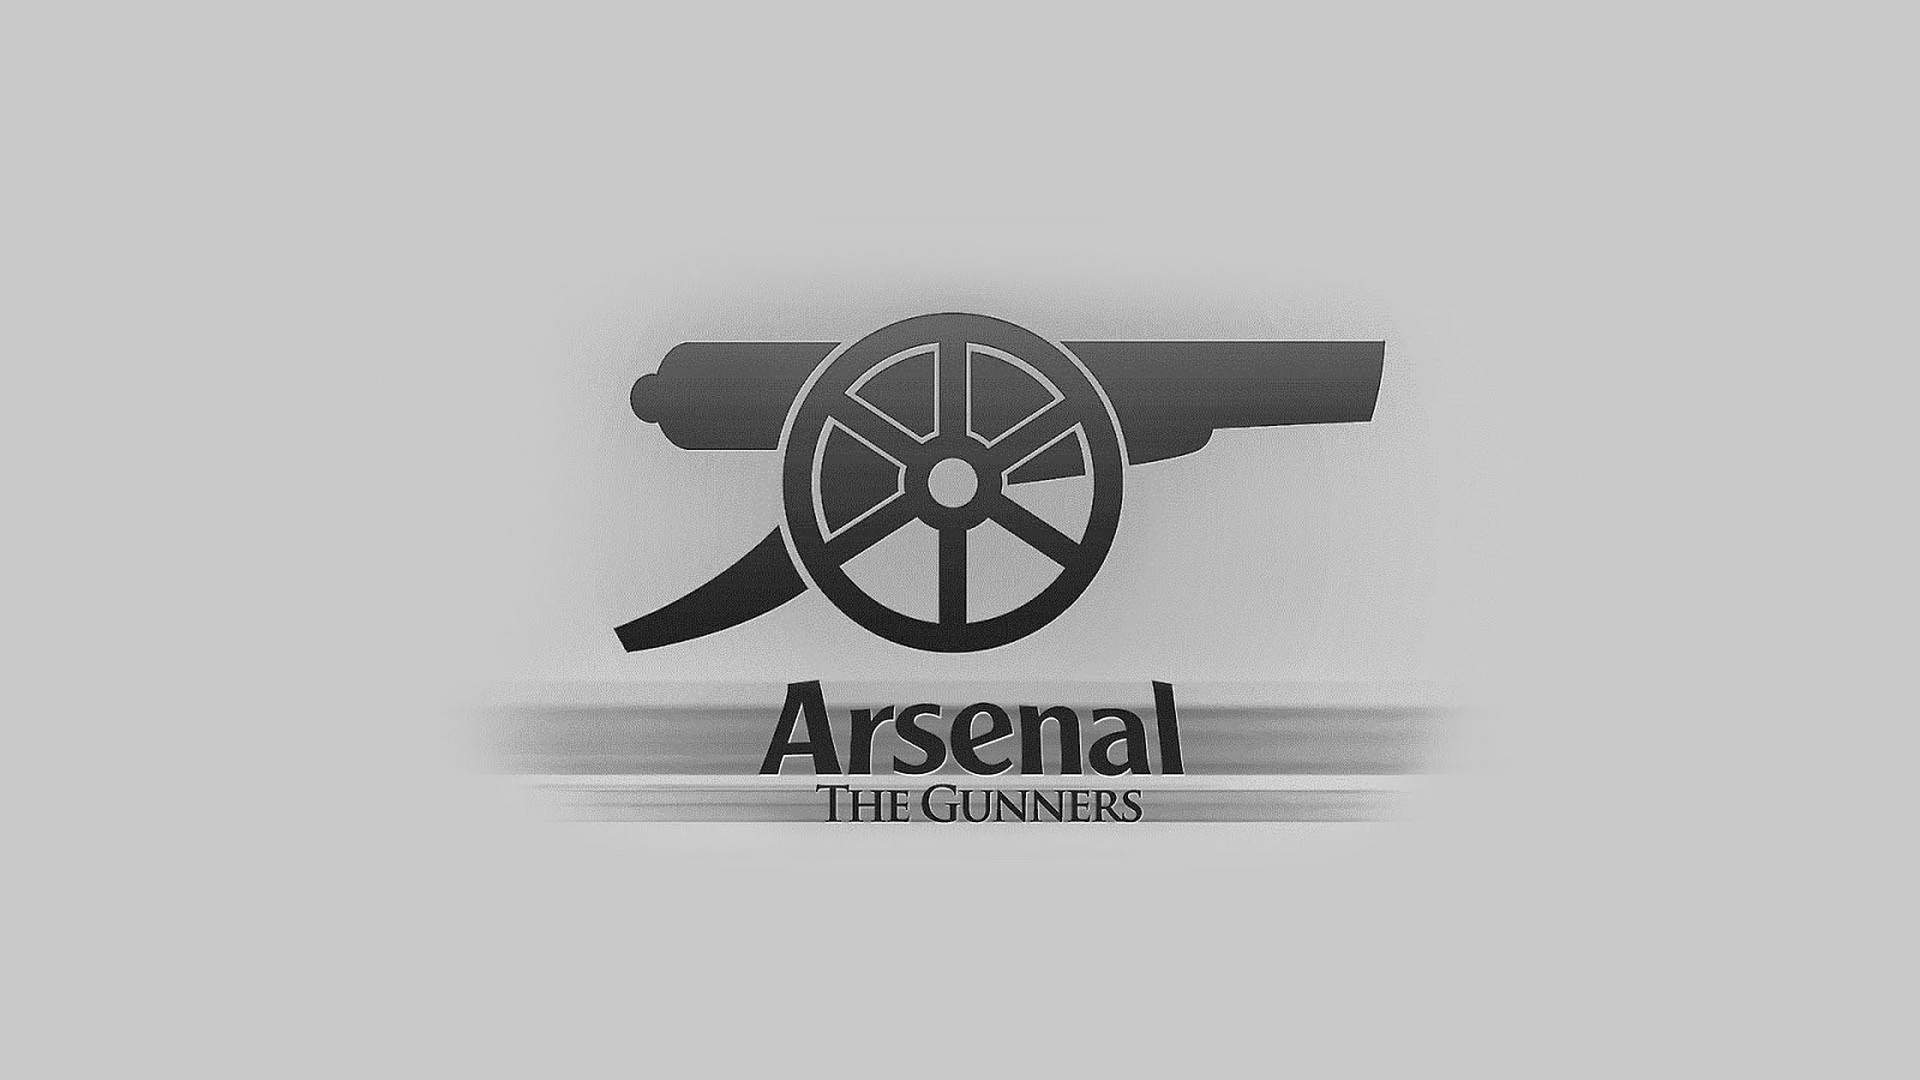 Wallpapers HD Arsenal FC With Resolution 1920X1080 pixel. You can make this wallpaper for your Mac or Windows Desktop Background, iPhone, Android or Tablet and another Smartphone device for free